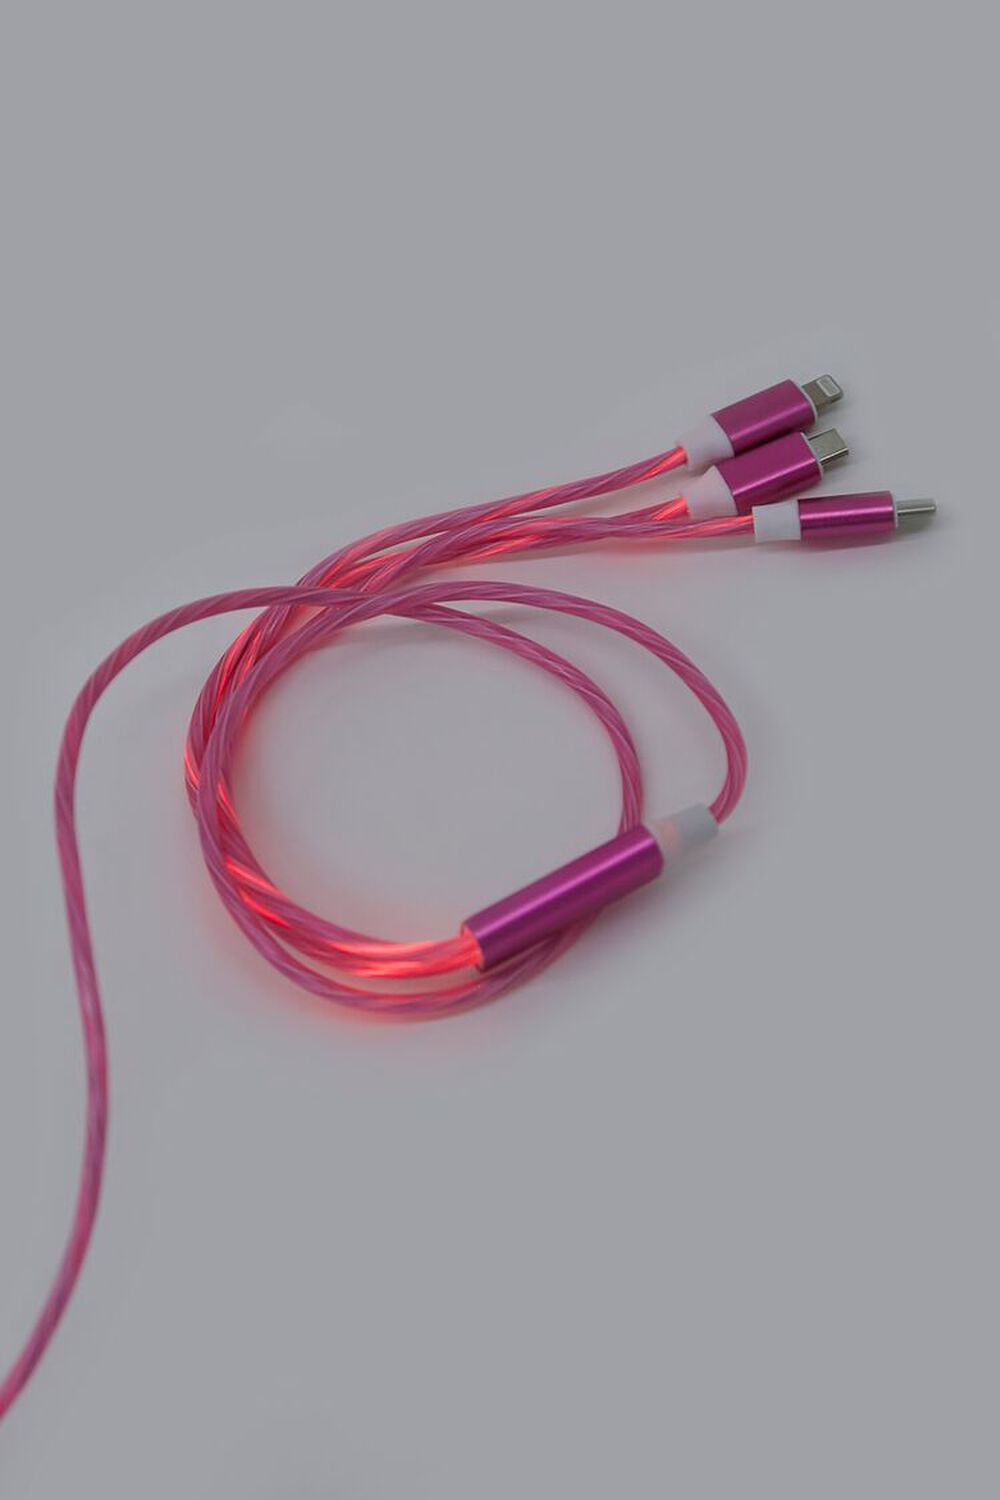 PINK Light-Up Charging Cord, image 1